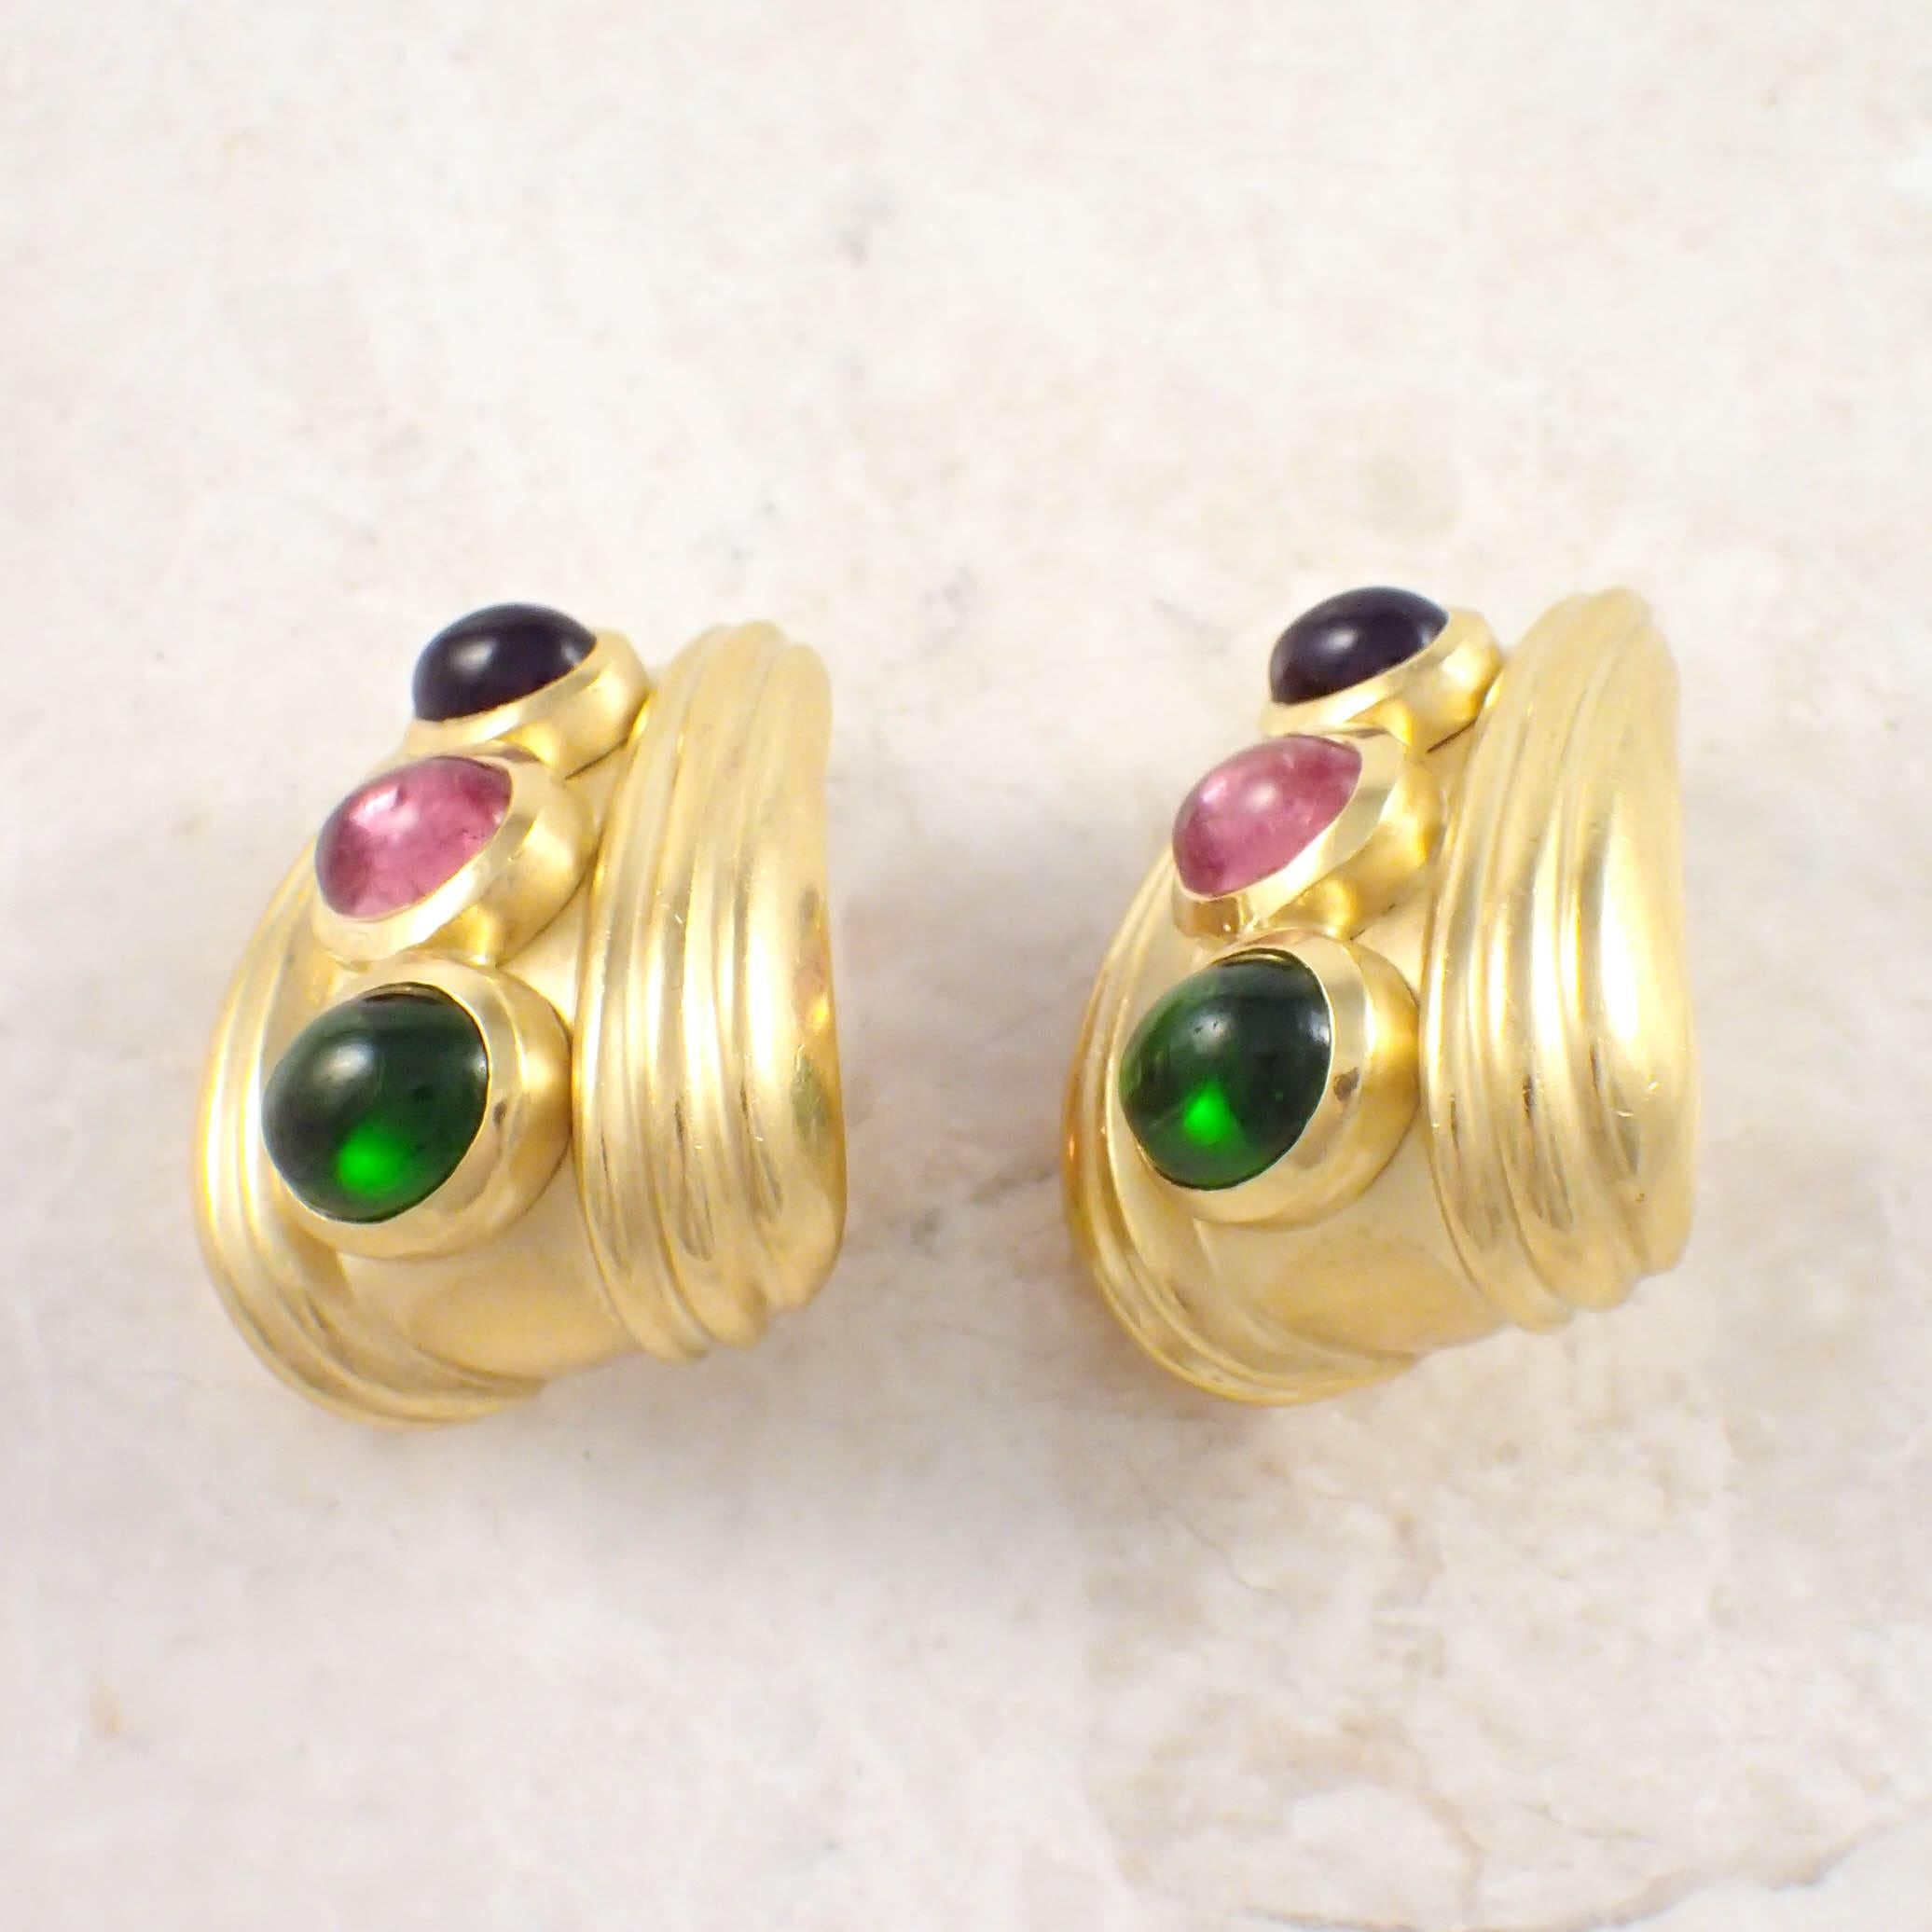 18K Yellow gold Seidengang multicolor stone earrings. The wide fluted earrings are set with oval cabochon cut green and pink tourmaline and amethysts. The earrings measure 2.3 X 26 mm. Gold weight 21.2 DWTs/ 32.9 grams. Stamped 